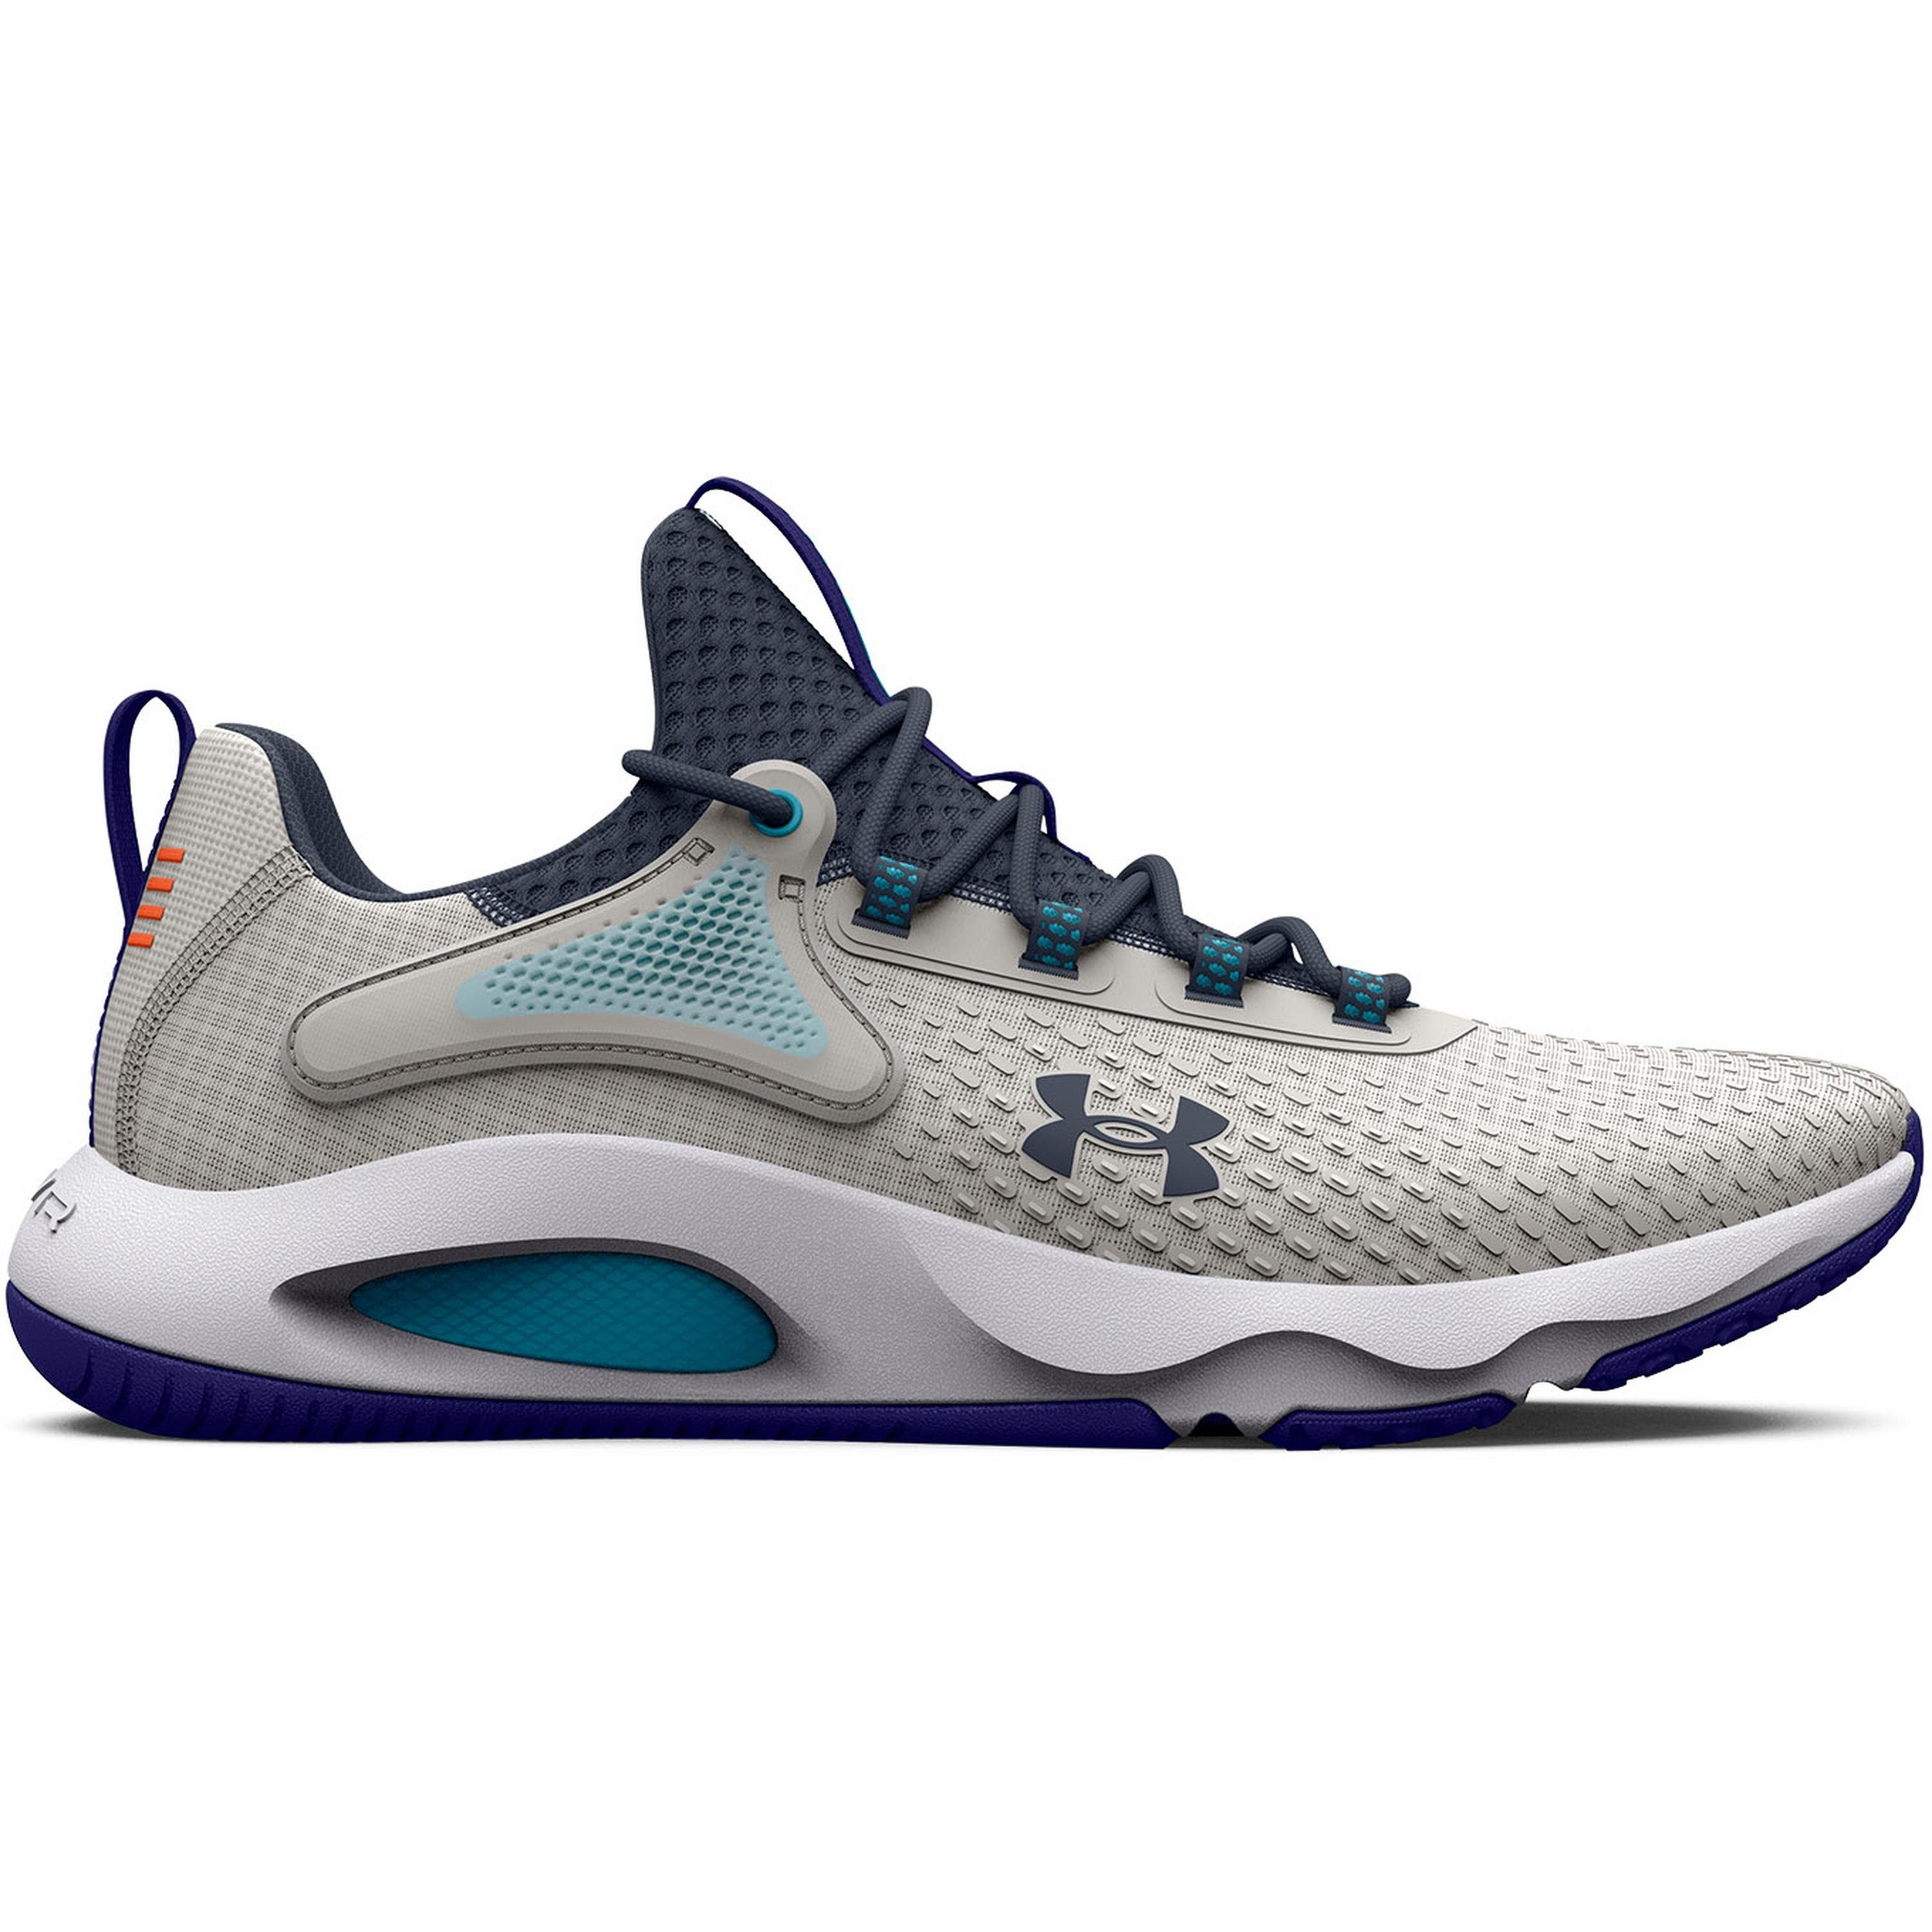 Under Armour® HOVR Rise 4 Fitnessschuh Grau